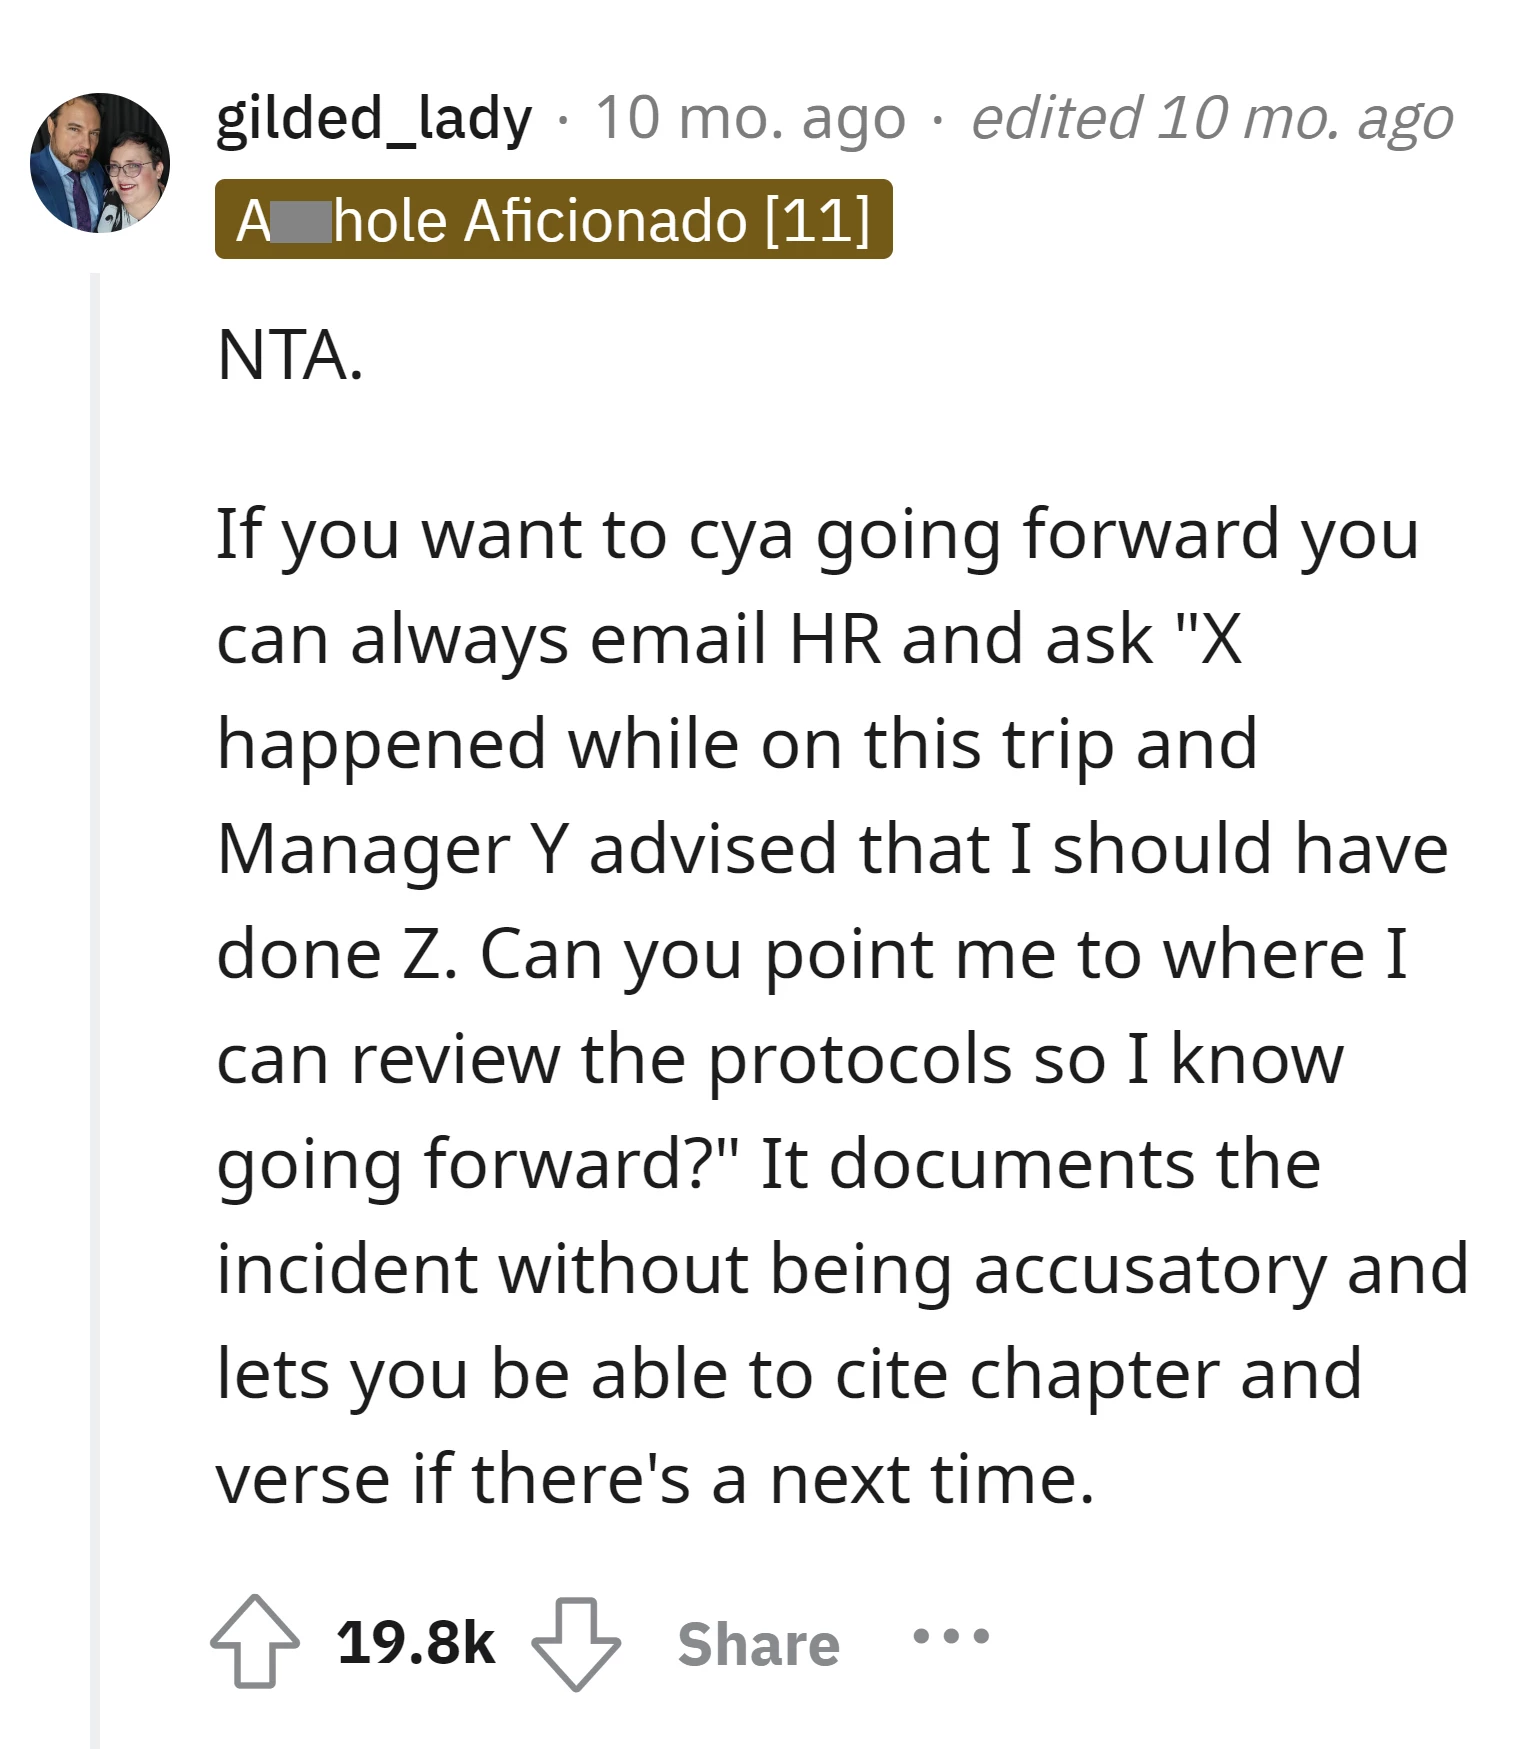 Email HR to inquire about protocols following the incident with the boss